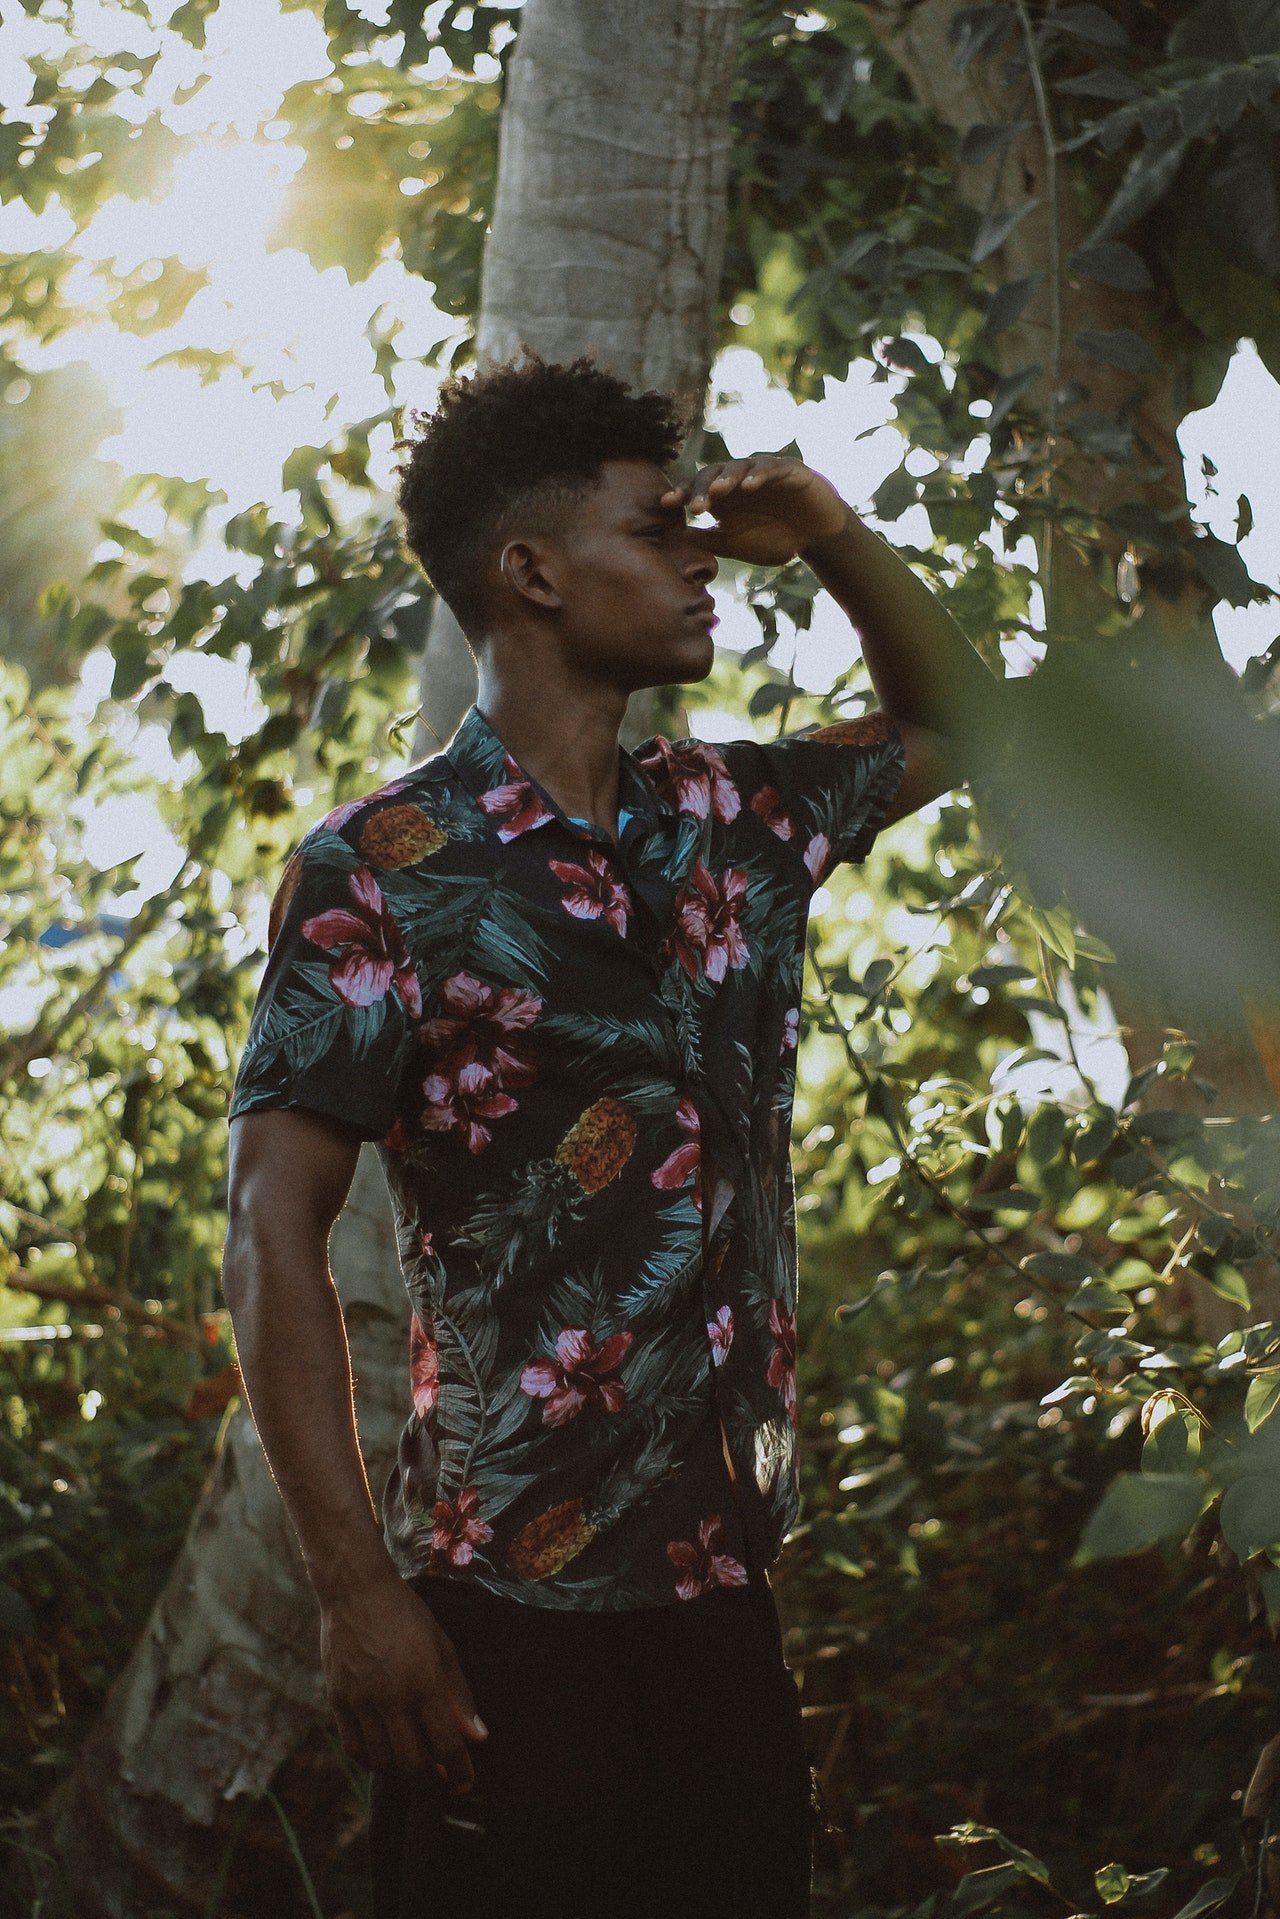 Photo of a man wearing a floral shirt in the woods | Photo: Pexels